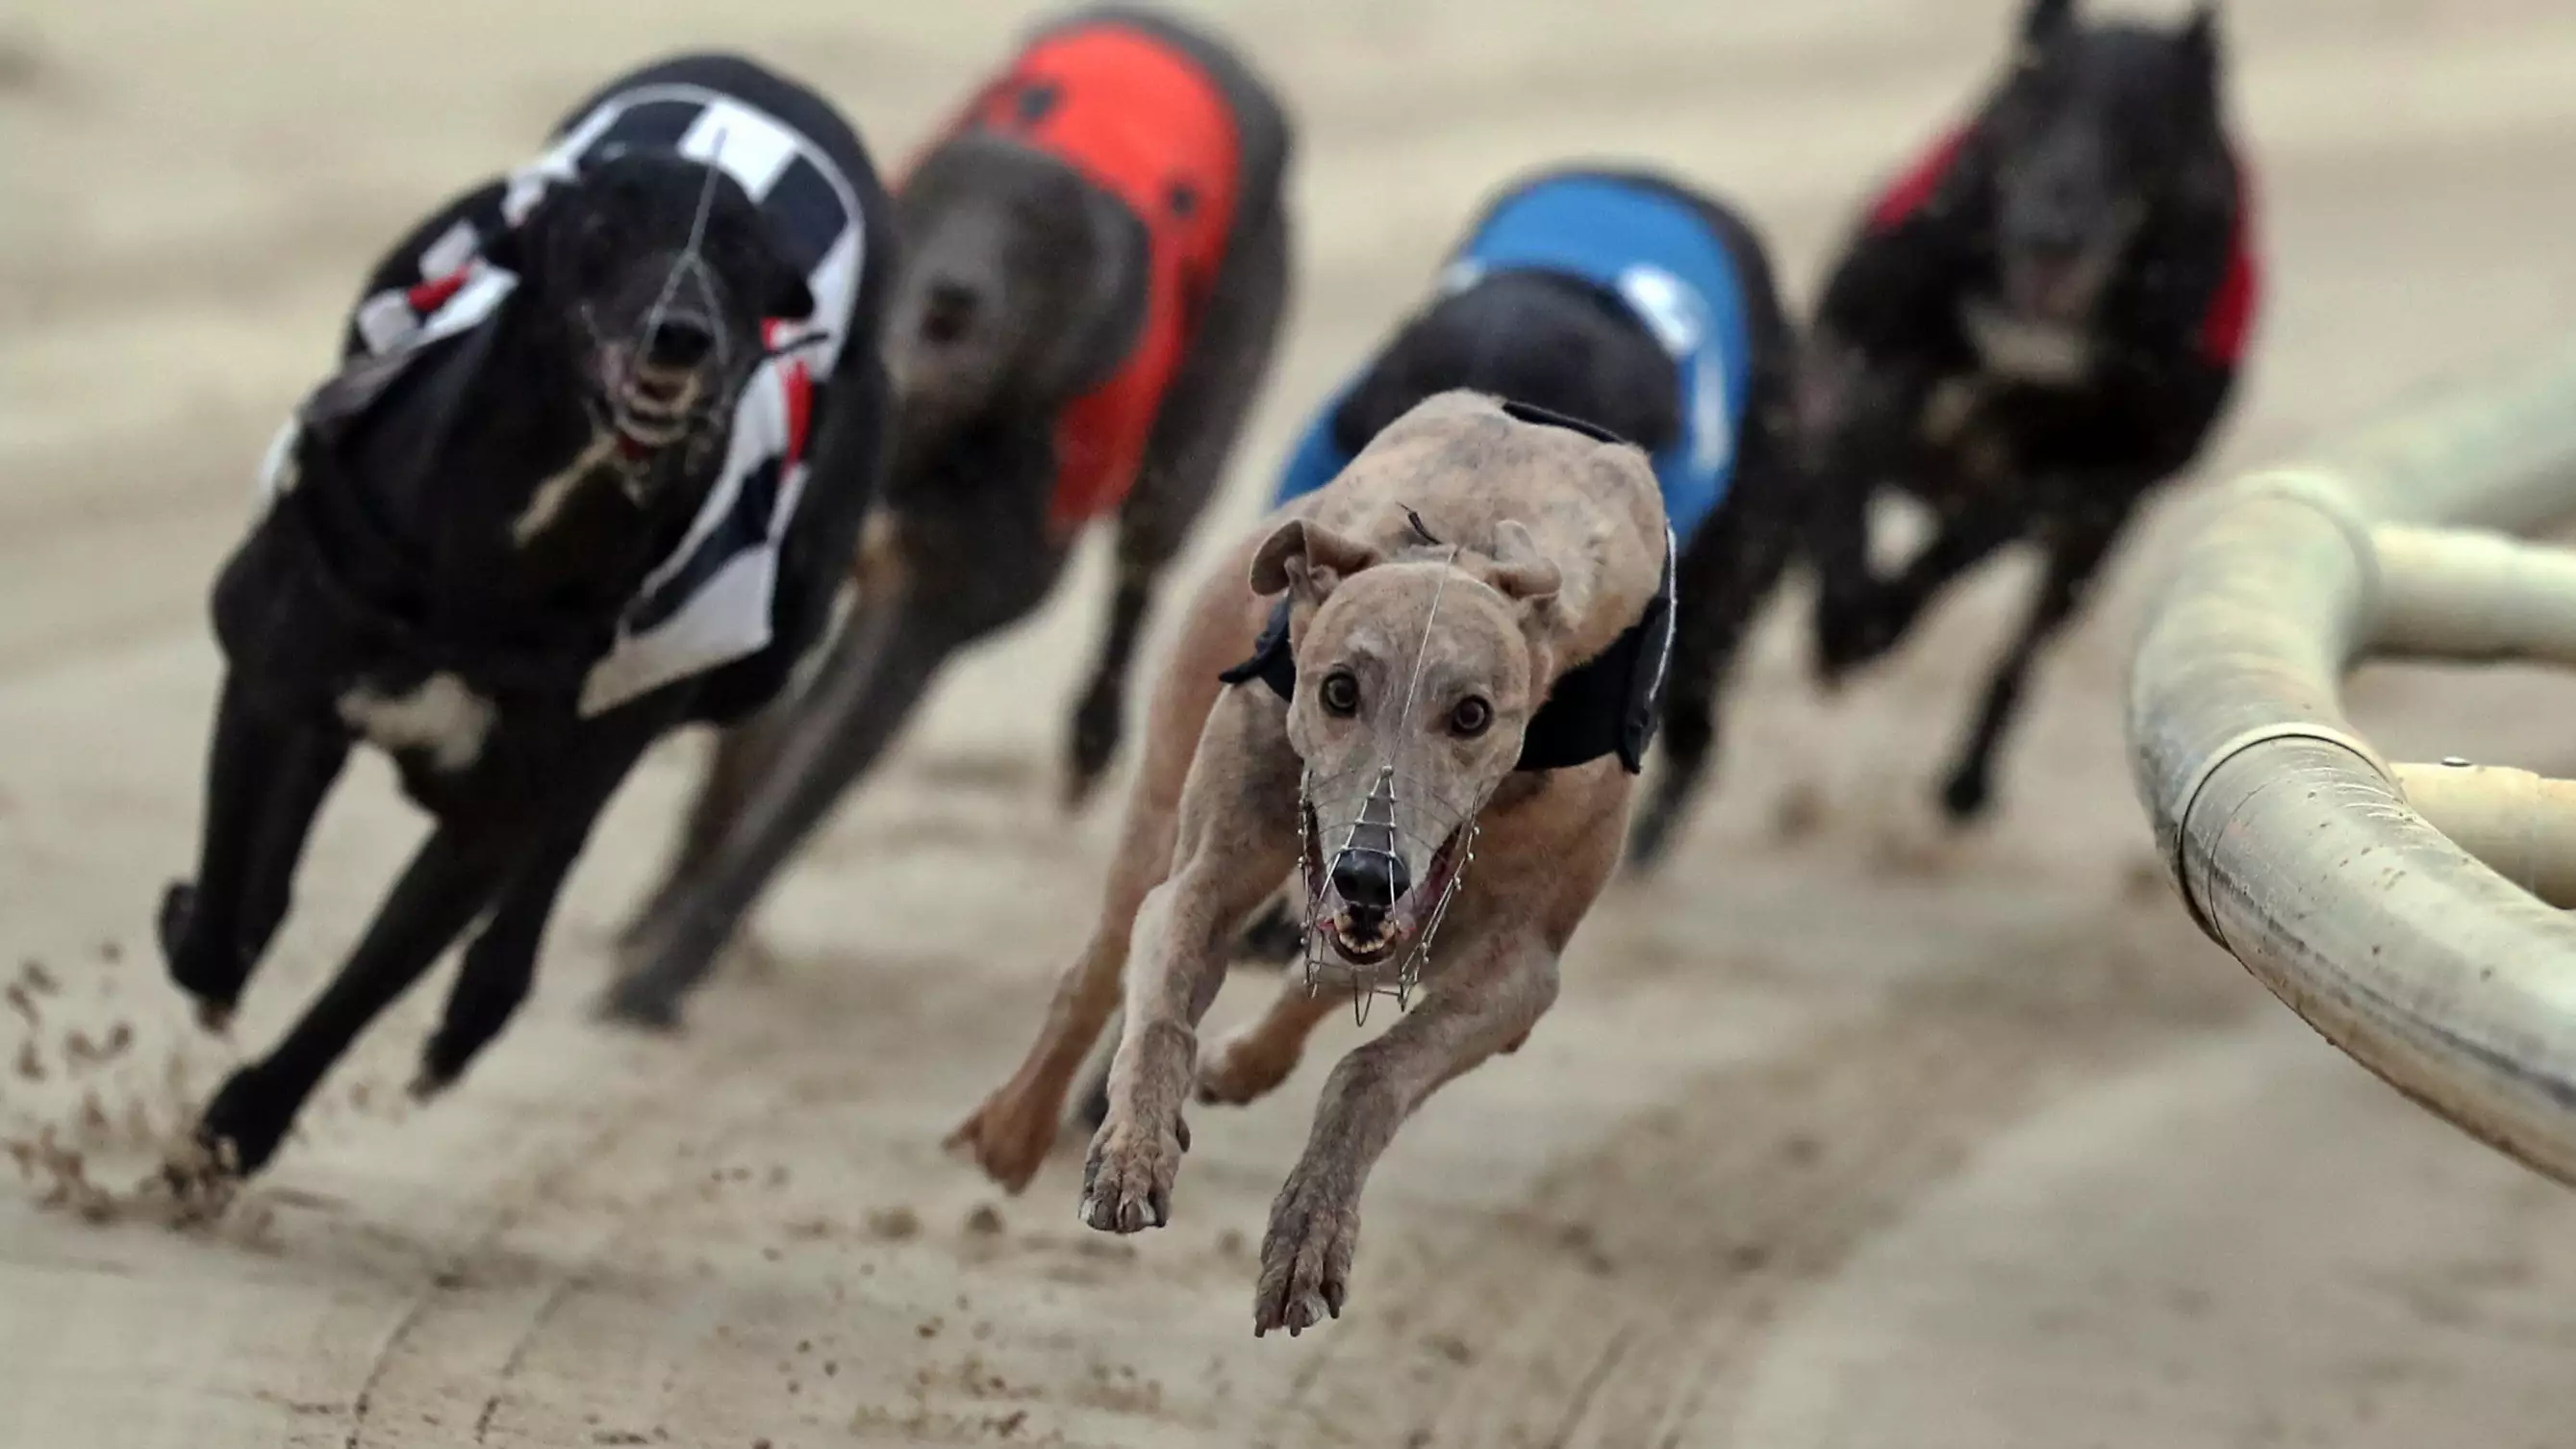 Charities Call For End To Greyhound Racing After Over 500 Deaths In One Year